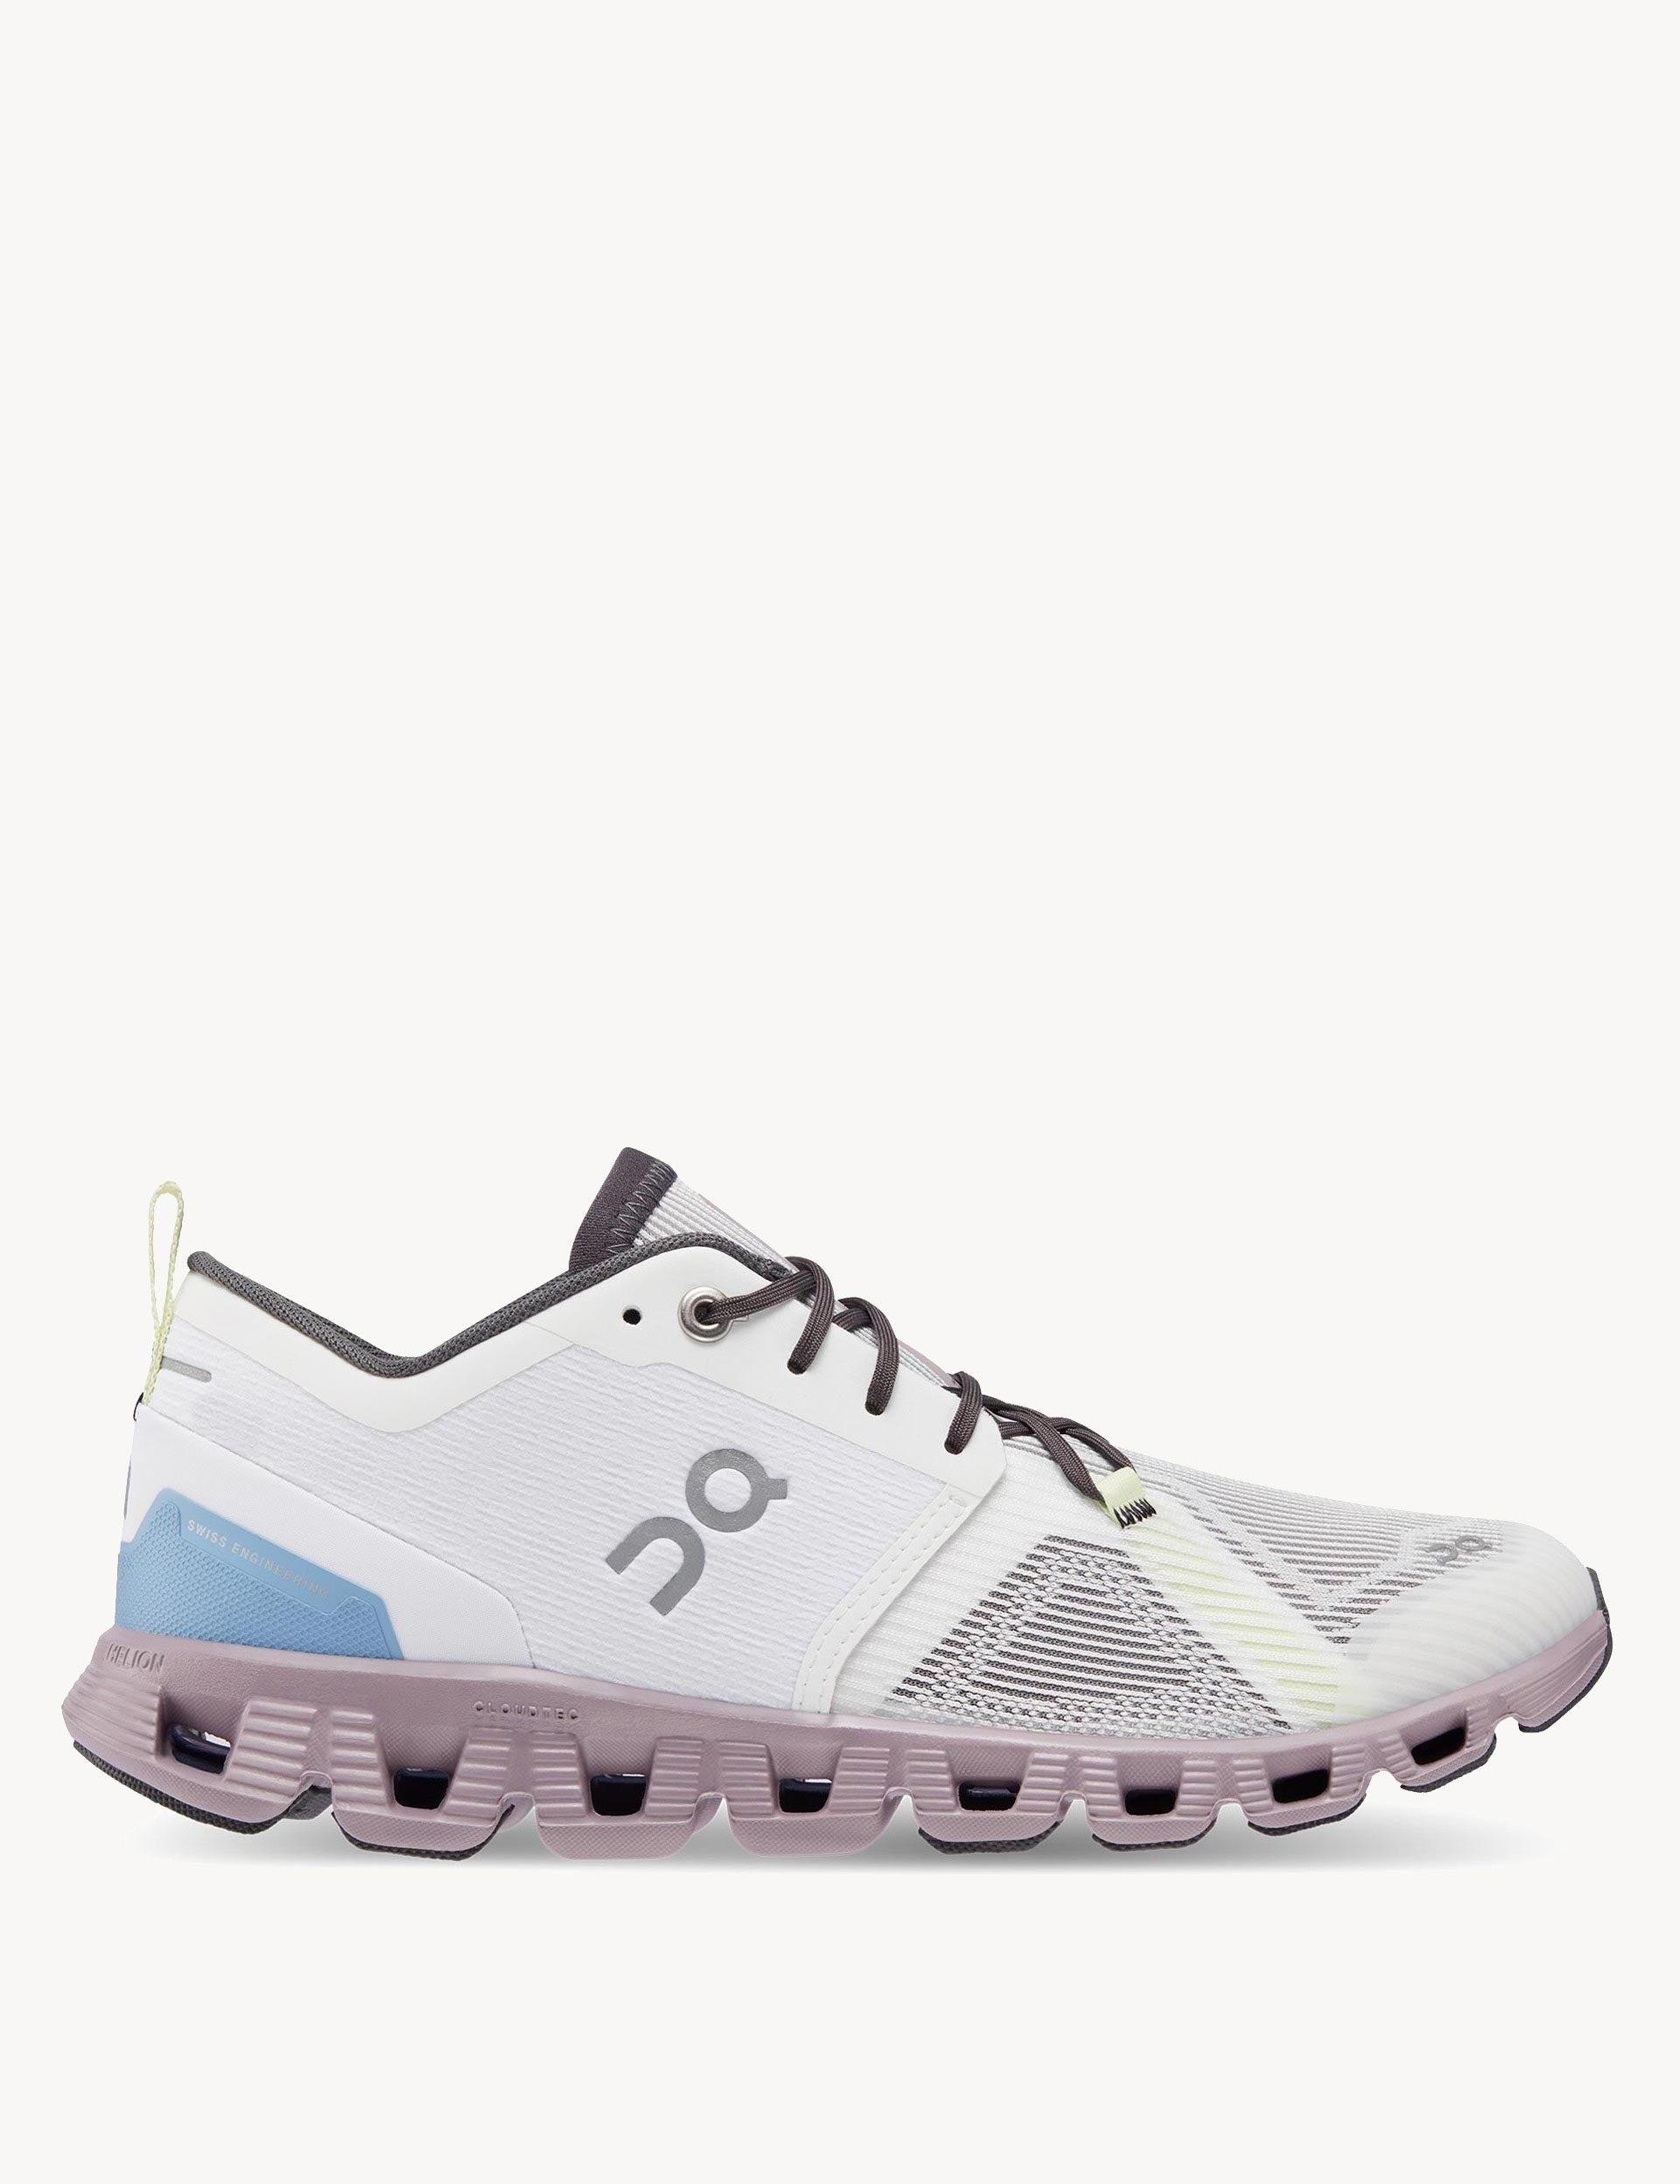 ON Running Cloud X 3 Shift - White/Heron | Women'simages1- The Sports Edit